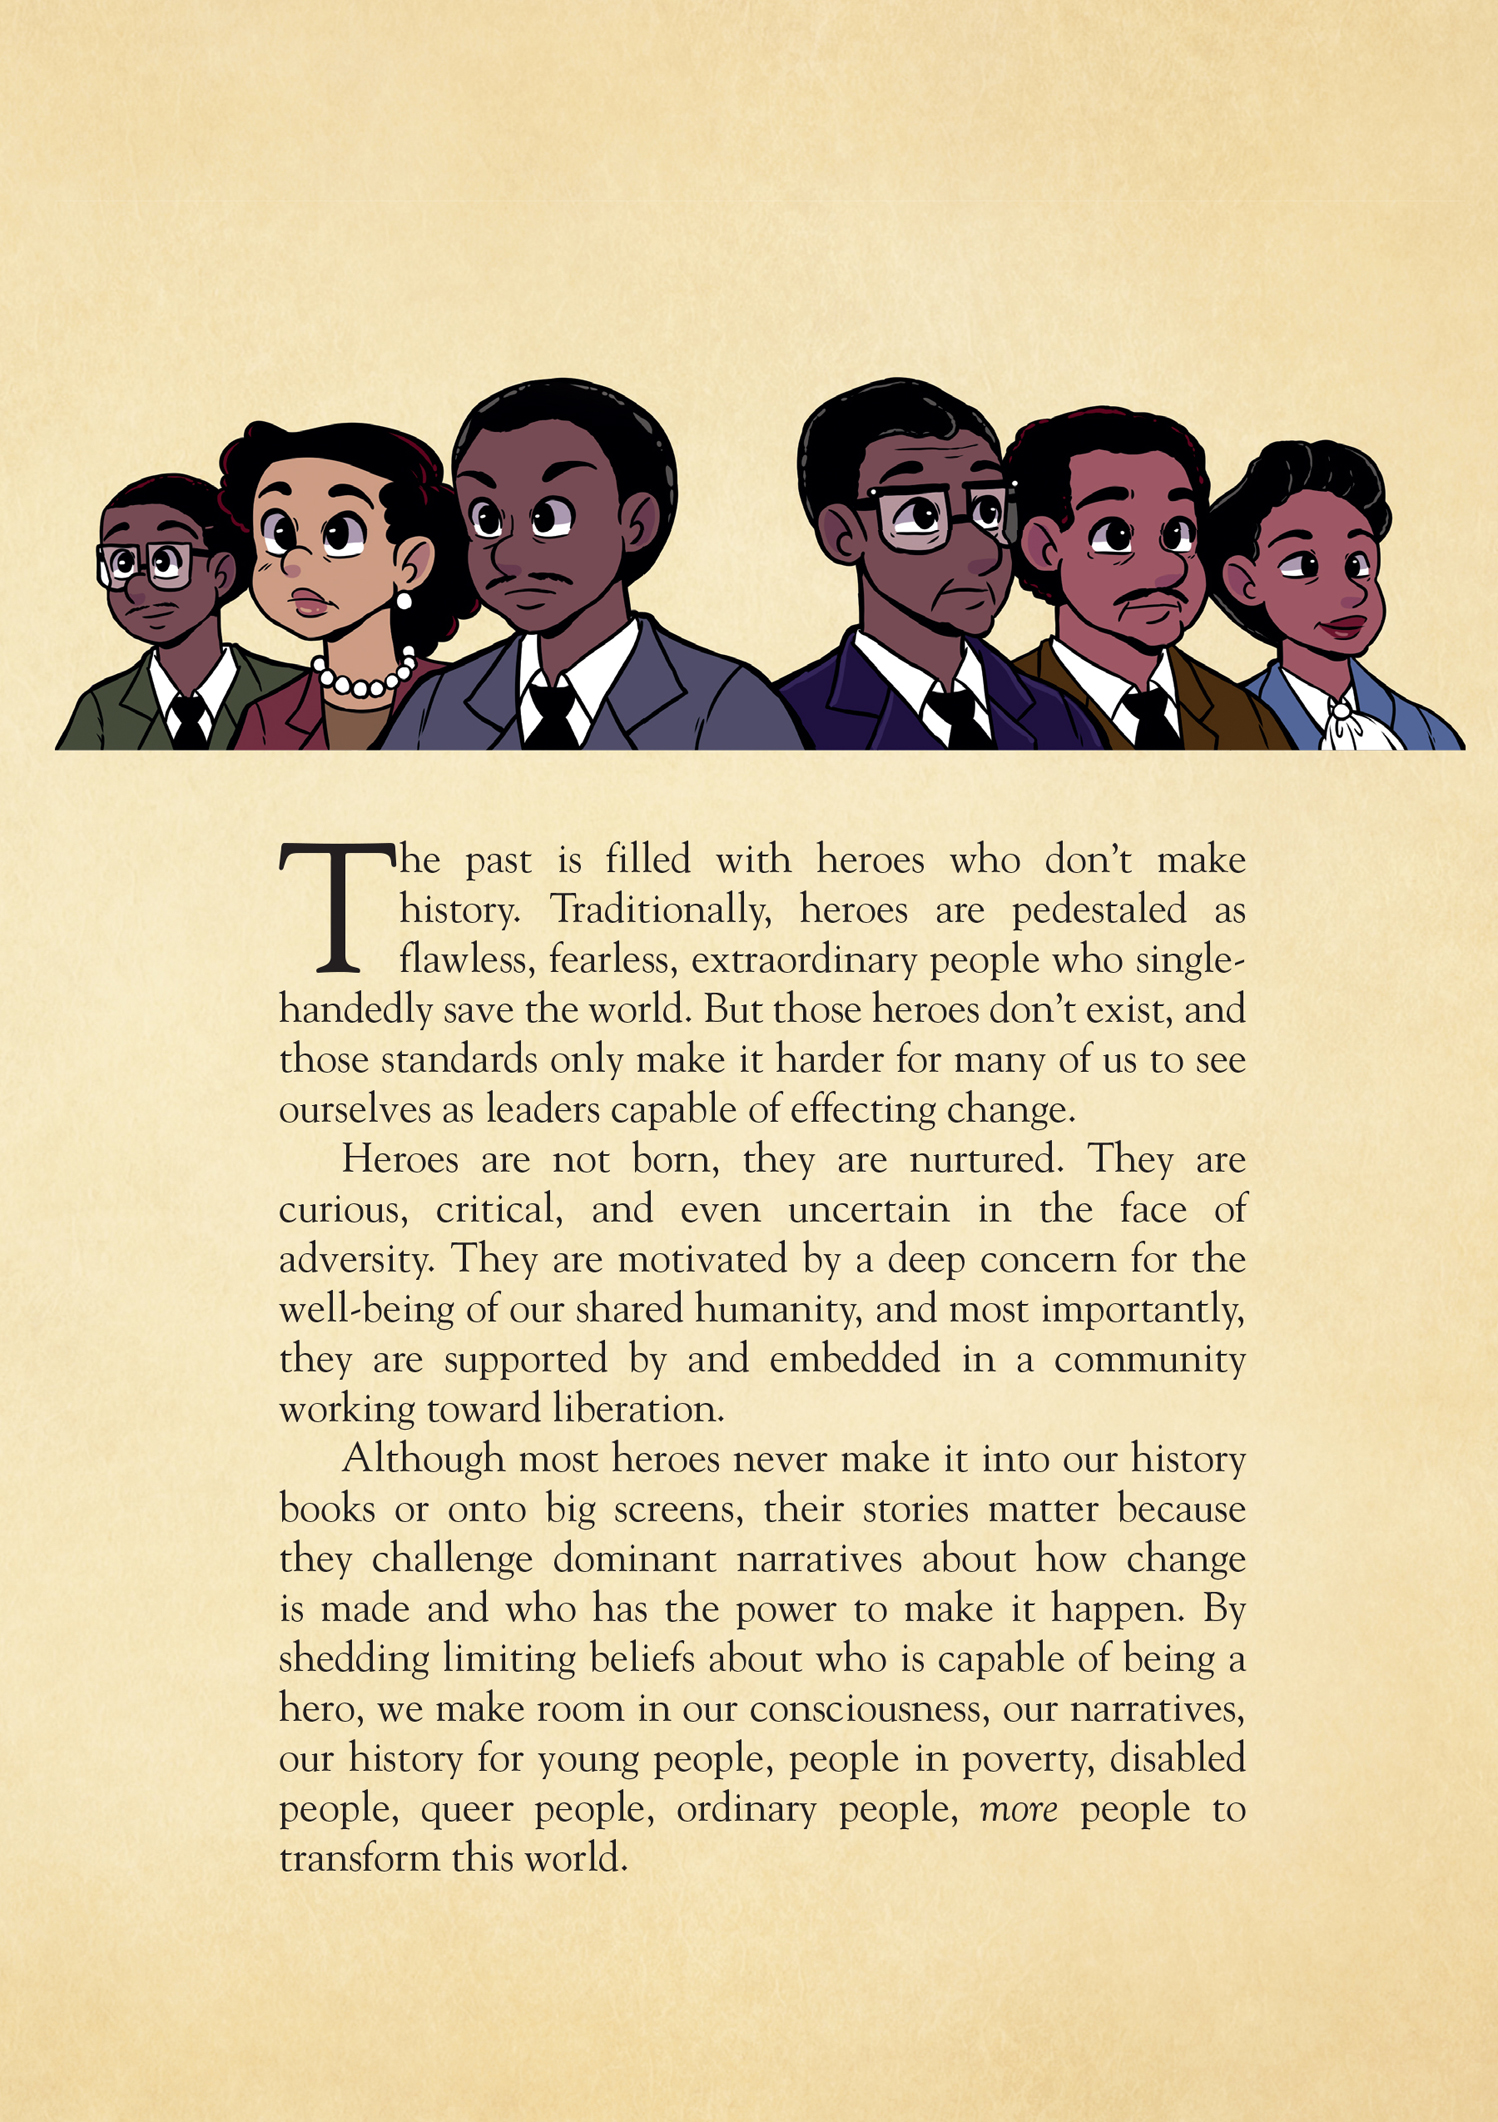 Read online History Comics comic -  Issue # Rosa Parks & Claudette Colvin - Civil Rights Heroes - 5